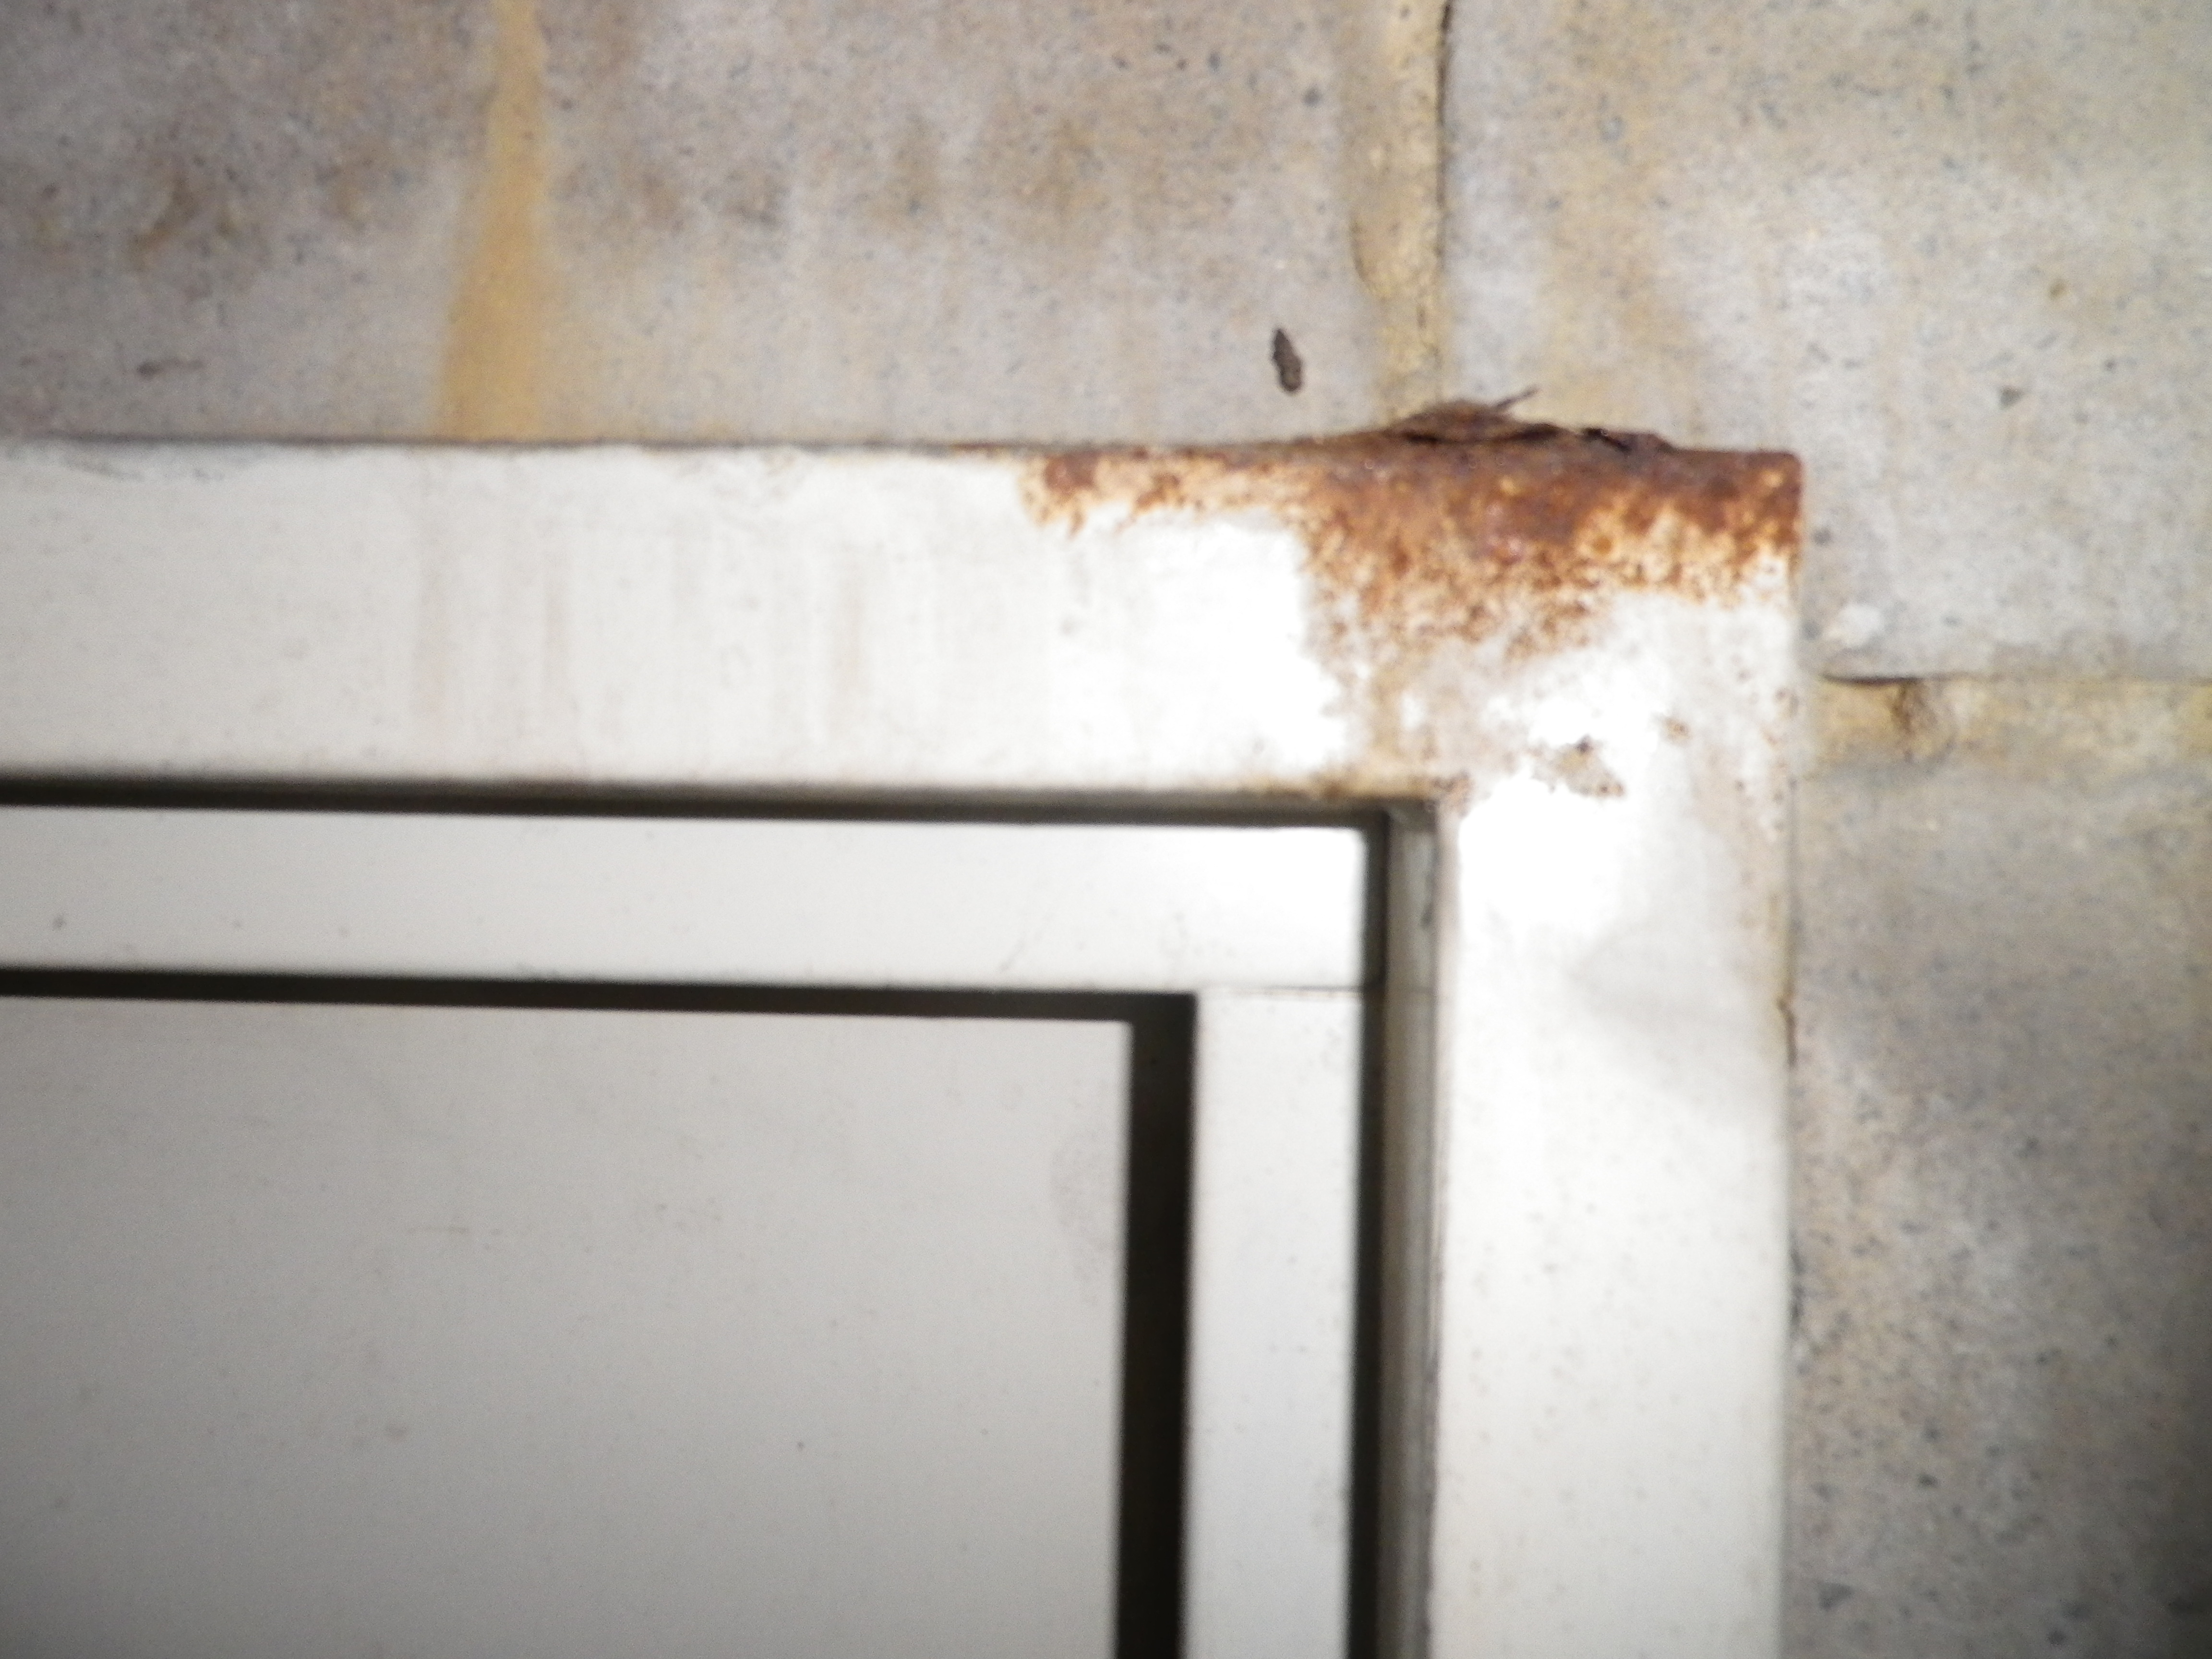 SP52948-internal-fire-door-between-Block-C-and-Block-D-rusted-frame-due-to-water-damages-photo-3-16Apr2021.jpg